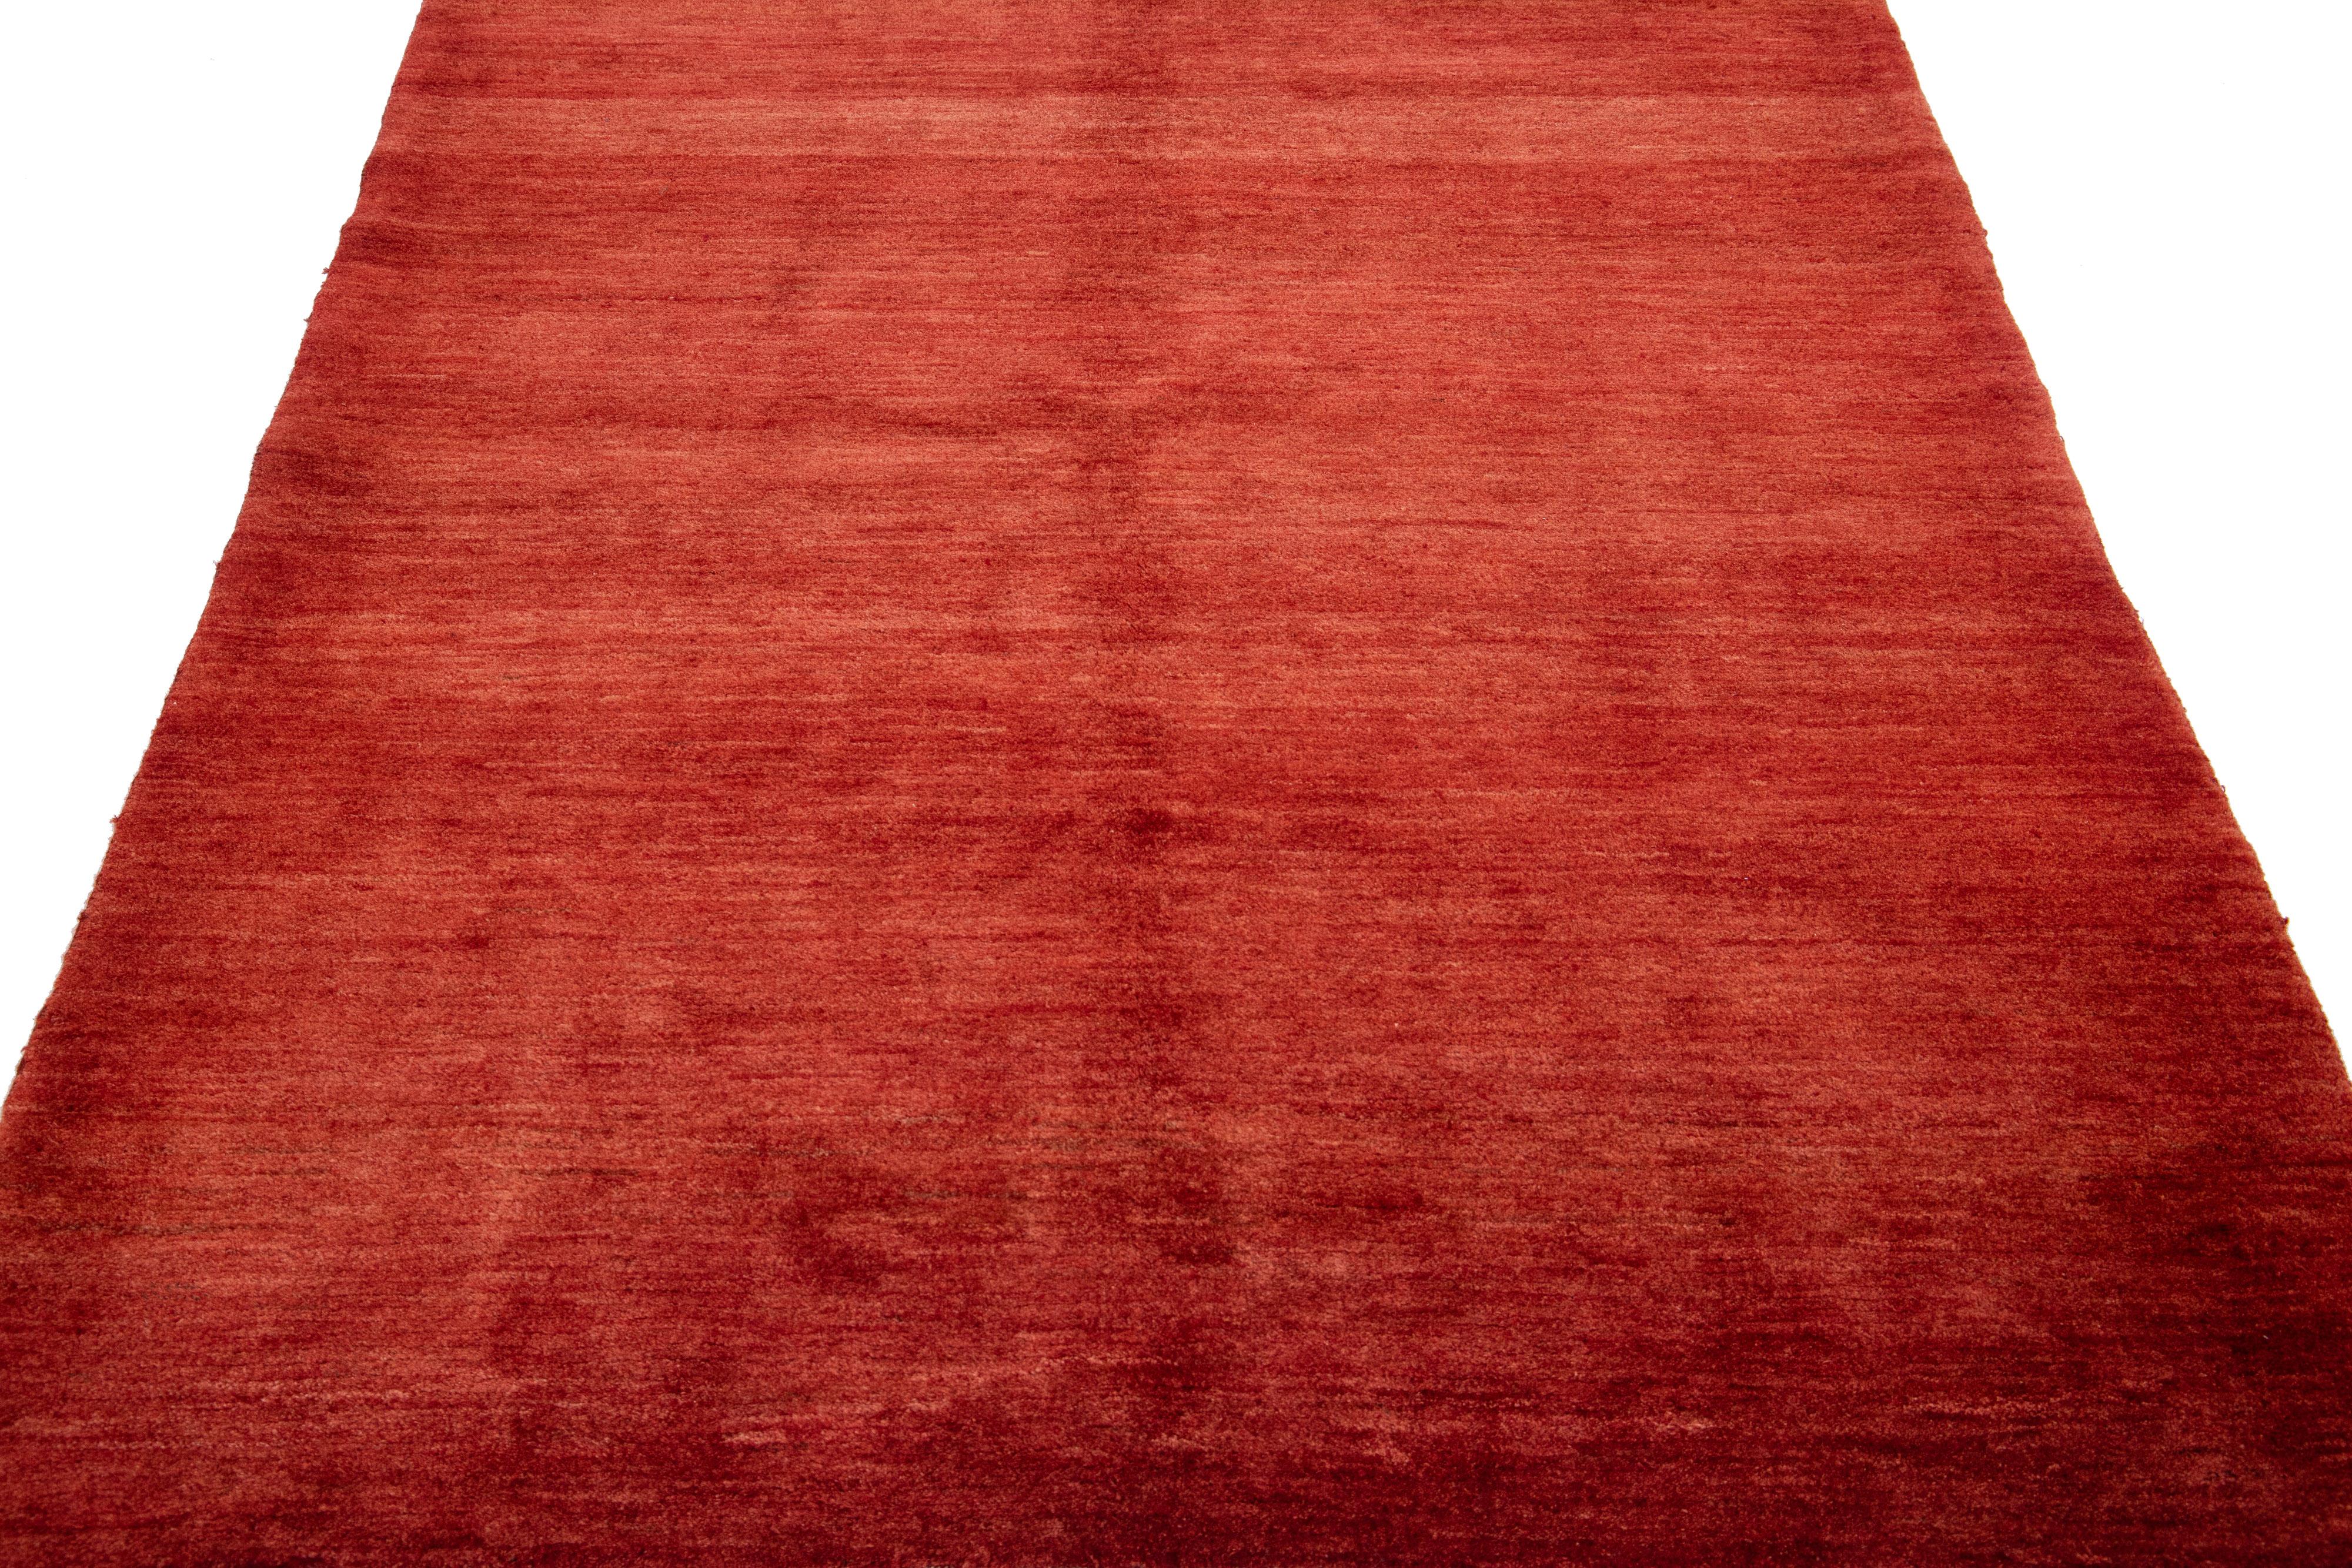 Beautiful modern Gabbeh-style hand-knotted wool rug with a red-rust color field. This piece has a gorgeous all-over solid design.

This rug measures: 5'2